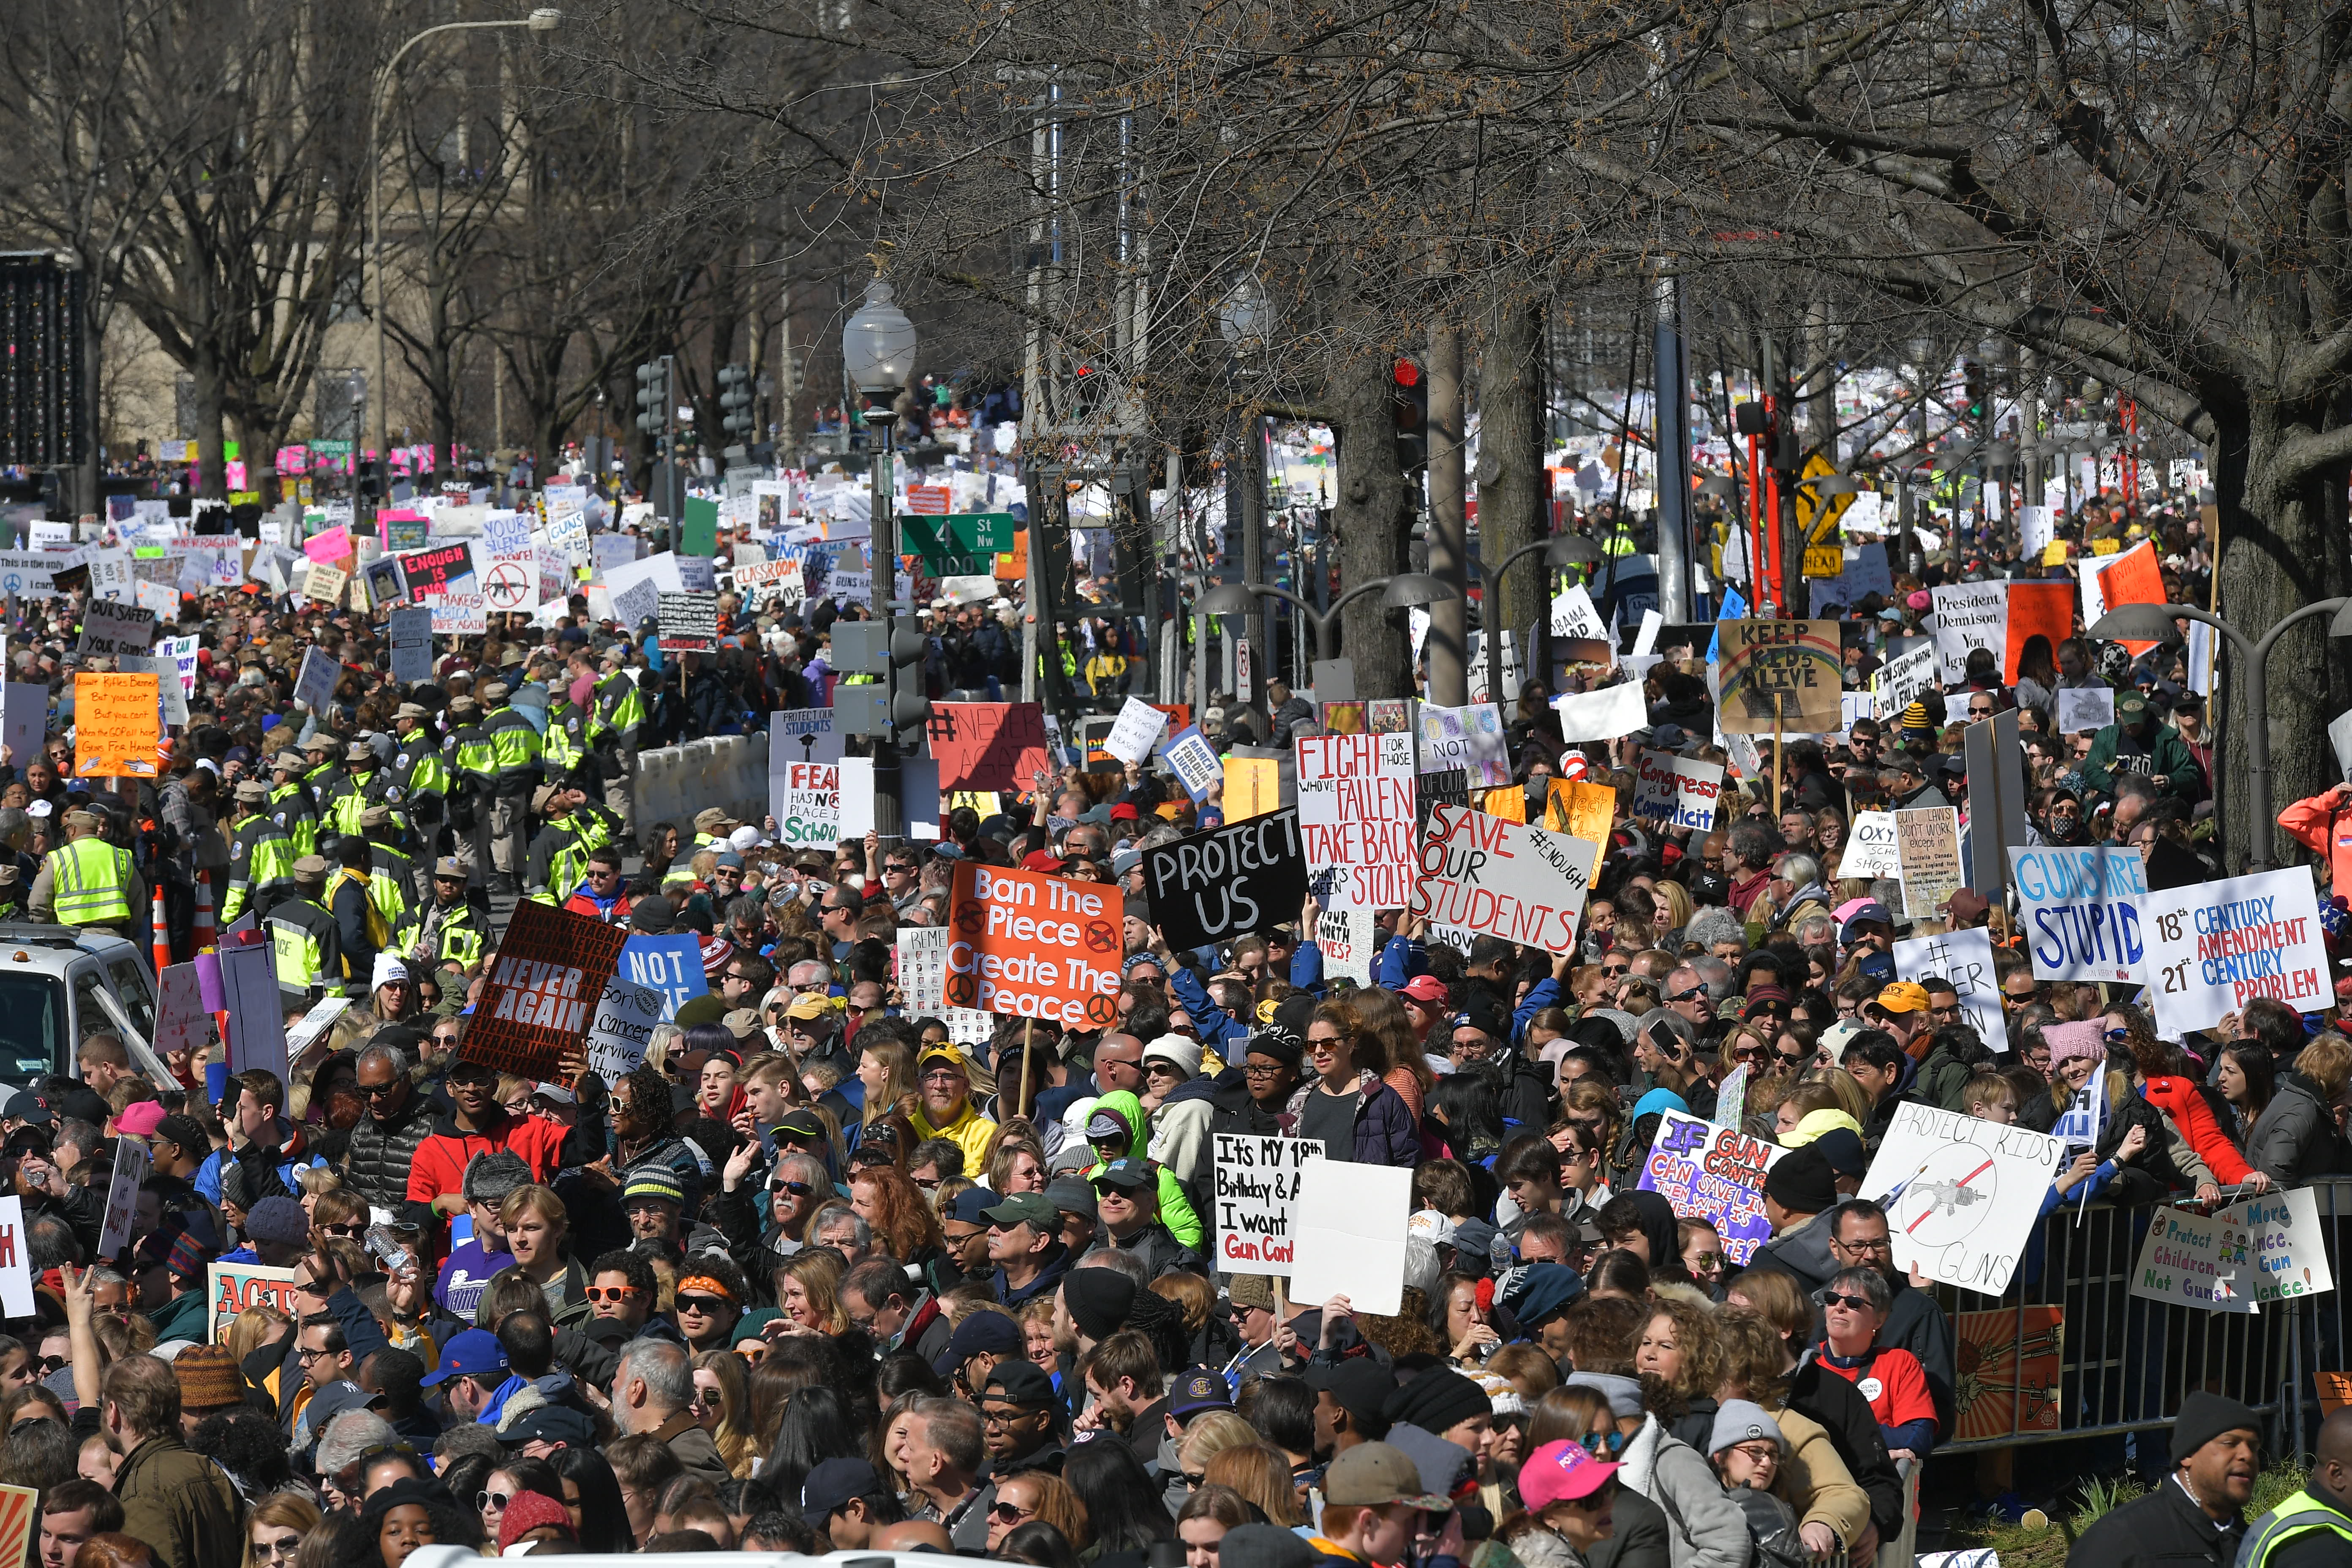 People gather at the March for Our Lives Rally in Washington, DC on March 24, 2018. Galvanized by a massacre at a Florida high school, hundreds of thousands of Americans are expected to take to the streets in cities across the United States on Saturday in the biggest protest for gun control in a generation. (NGAN/AFP/Getty Images)